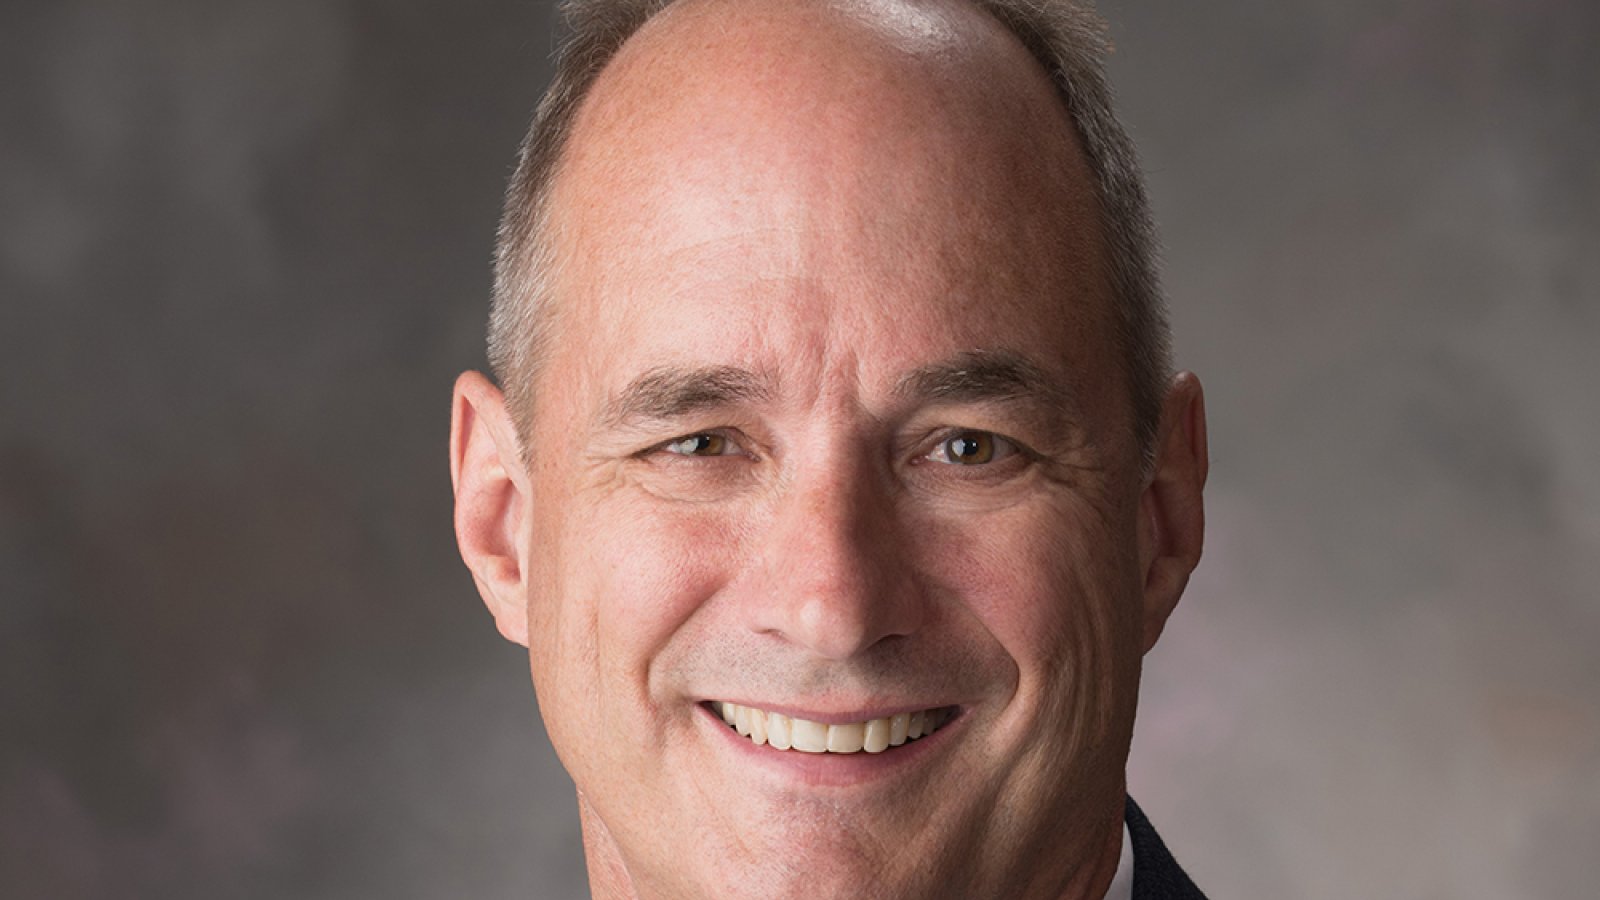 Laurence Rilett was founding director of Nebraska Transportation Center when it opened in 2006 until he resigned to take a new position at Auburn University in 2021.